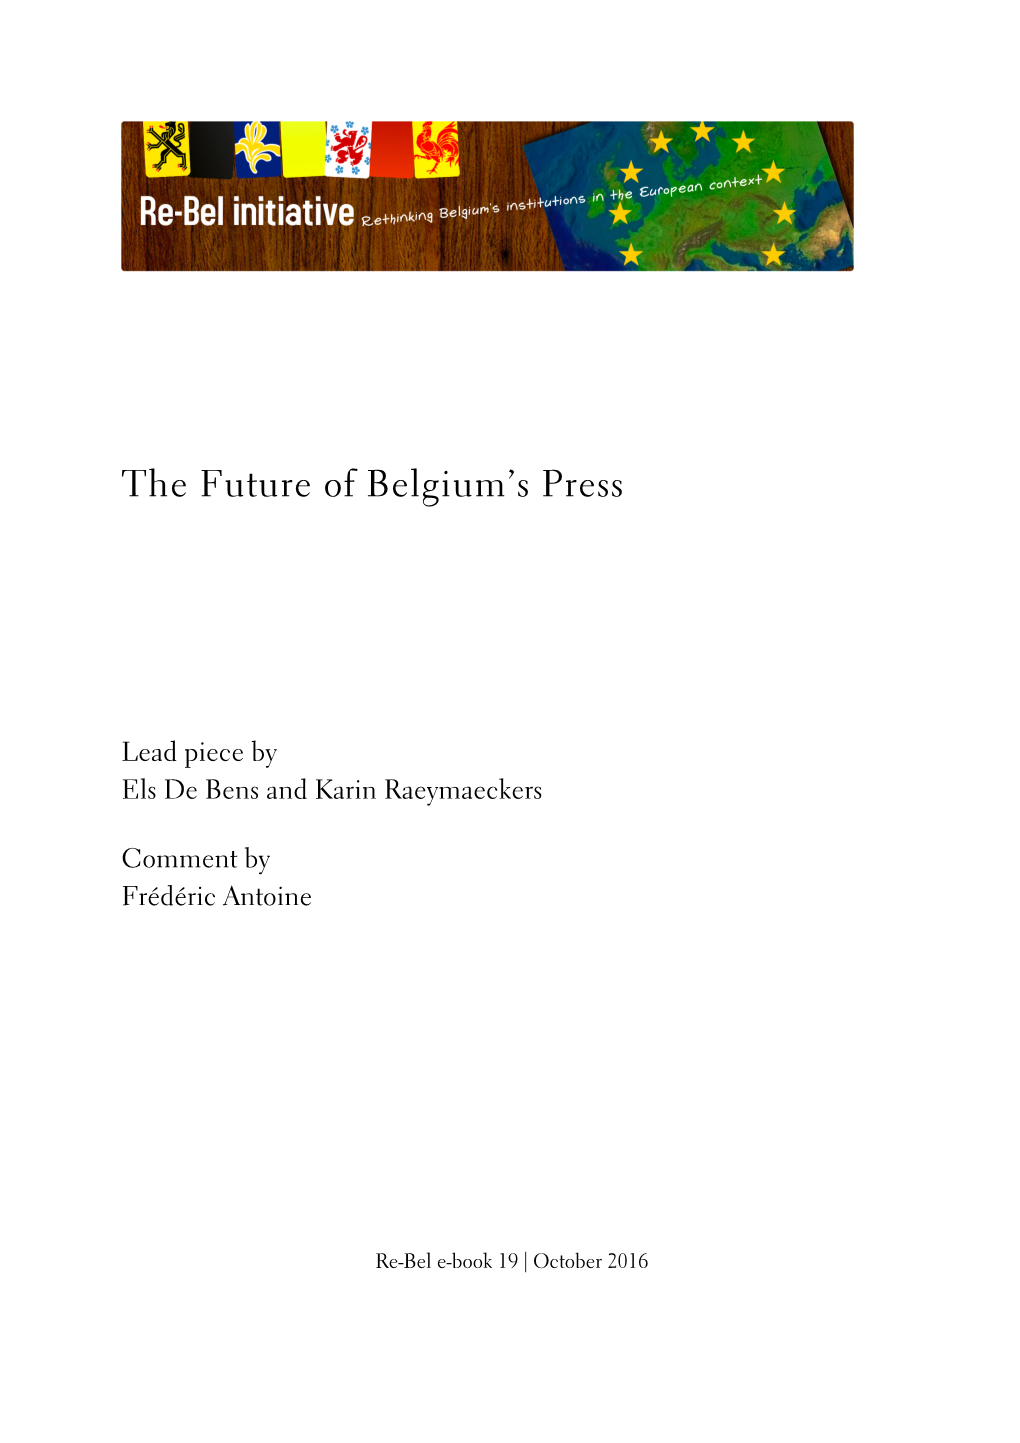 The Future of the Belgian Press: Common Challenges and Contrasting Prospects in the North and the South